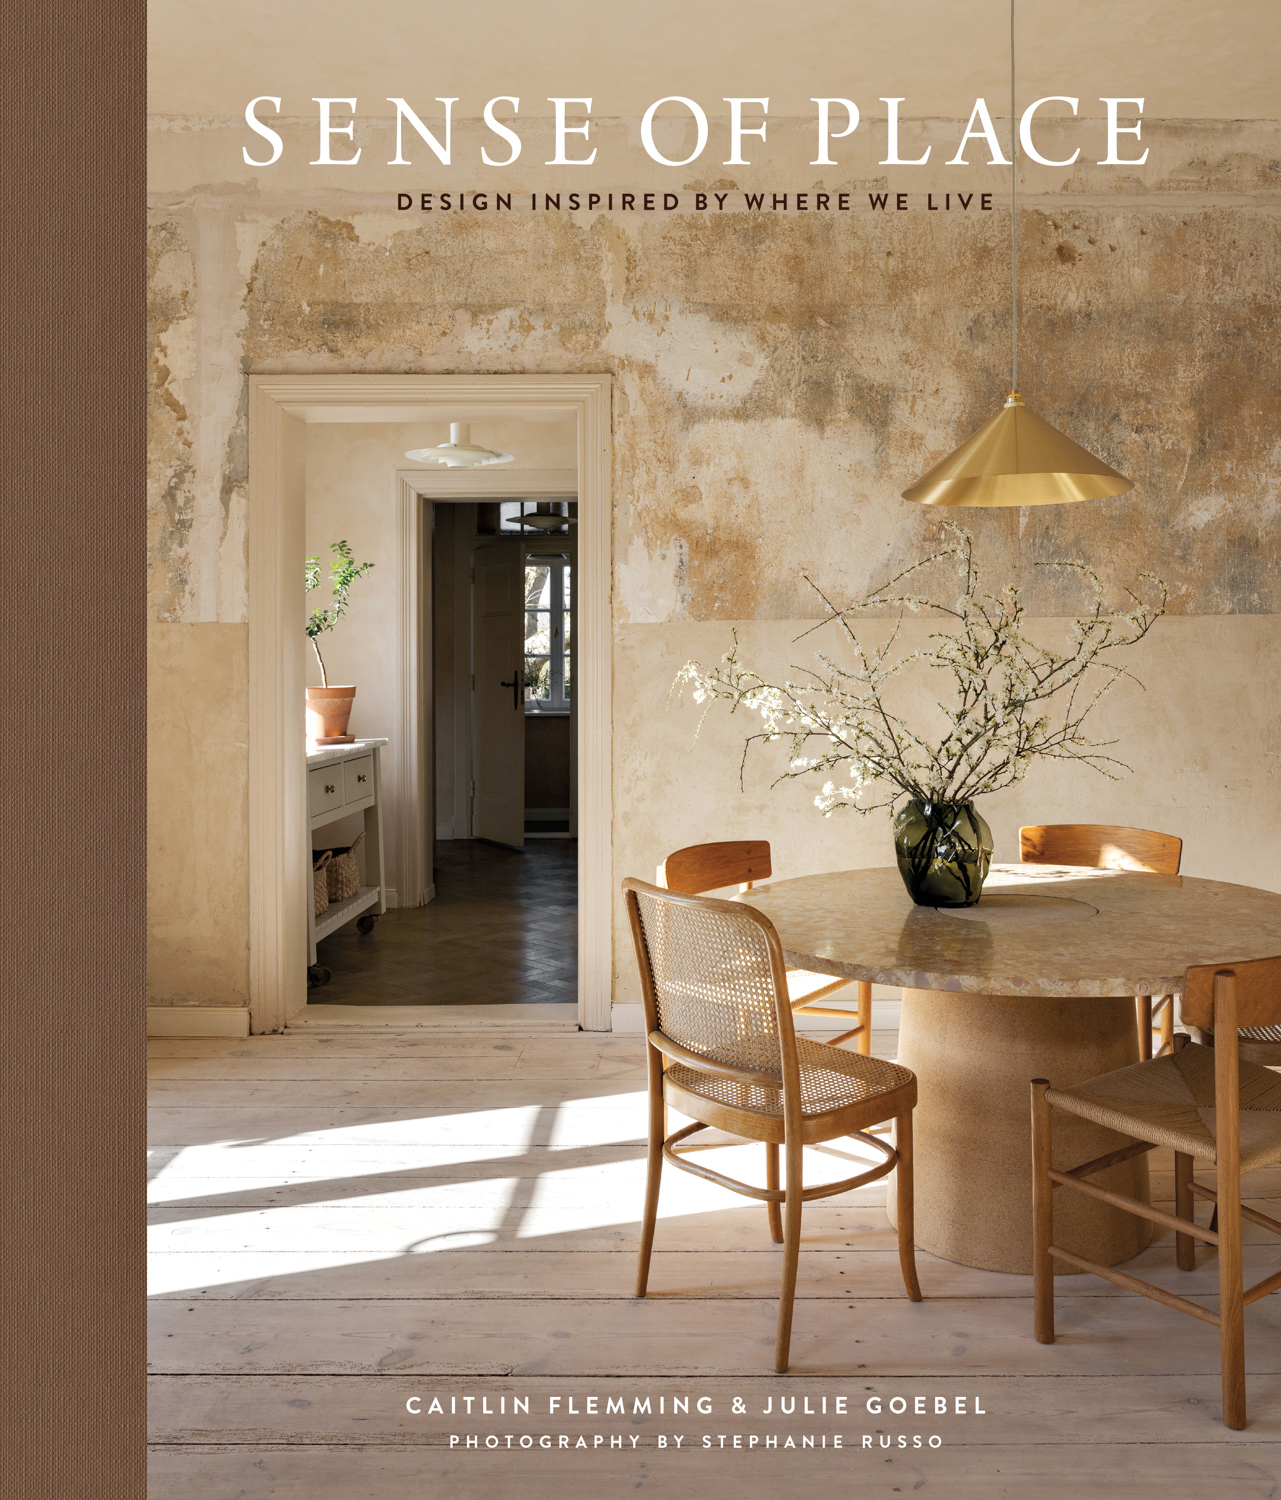 Cover of design book "Sense of Place," by Caitlin Flemming featuring a dining room in neutral tones